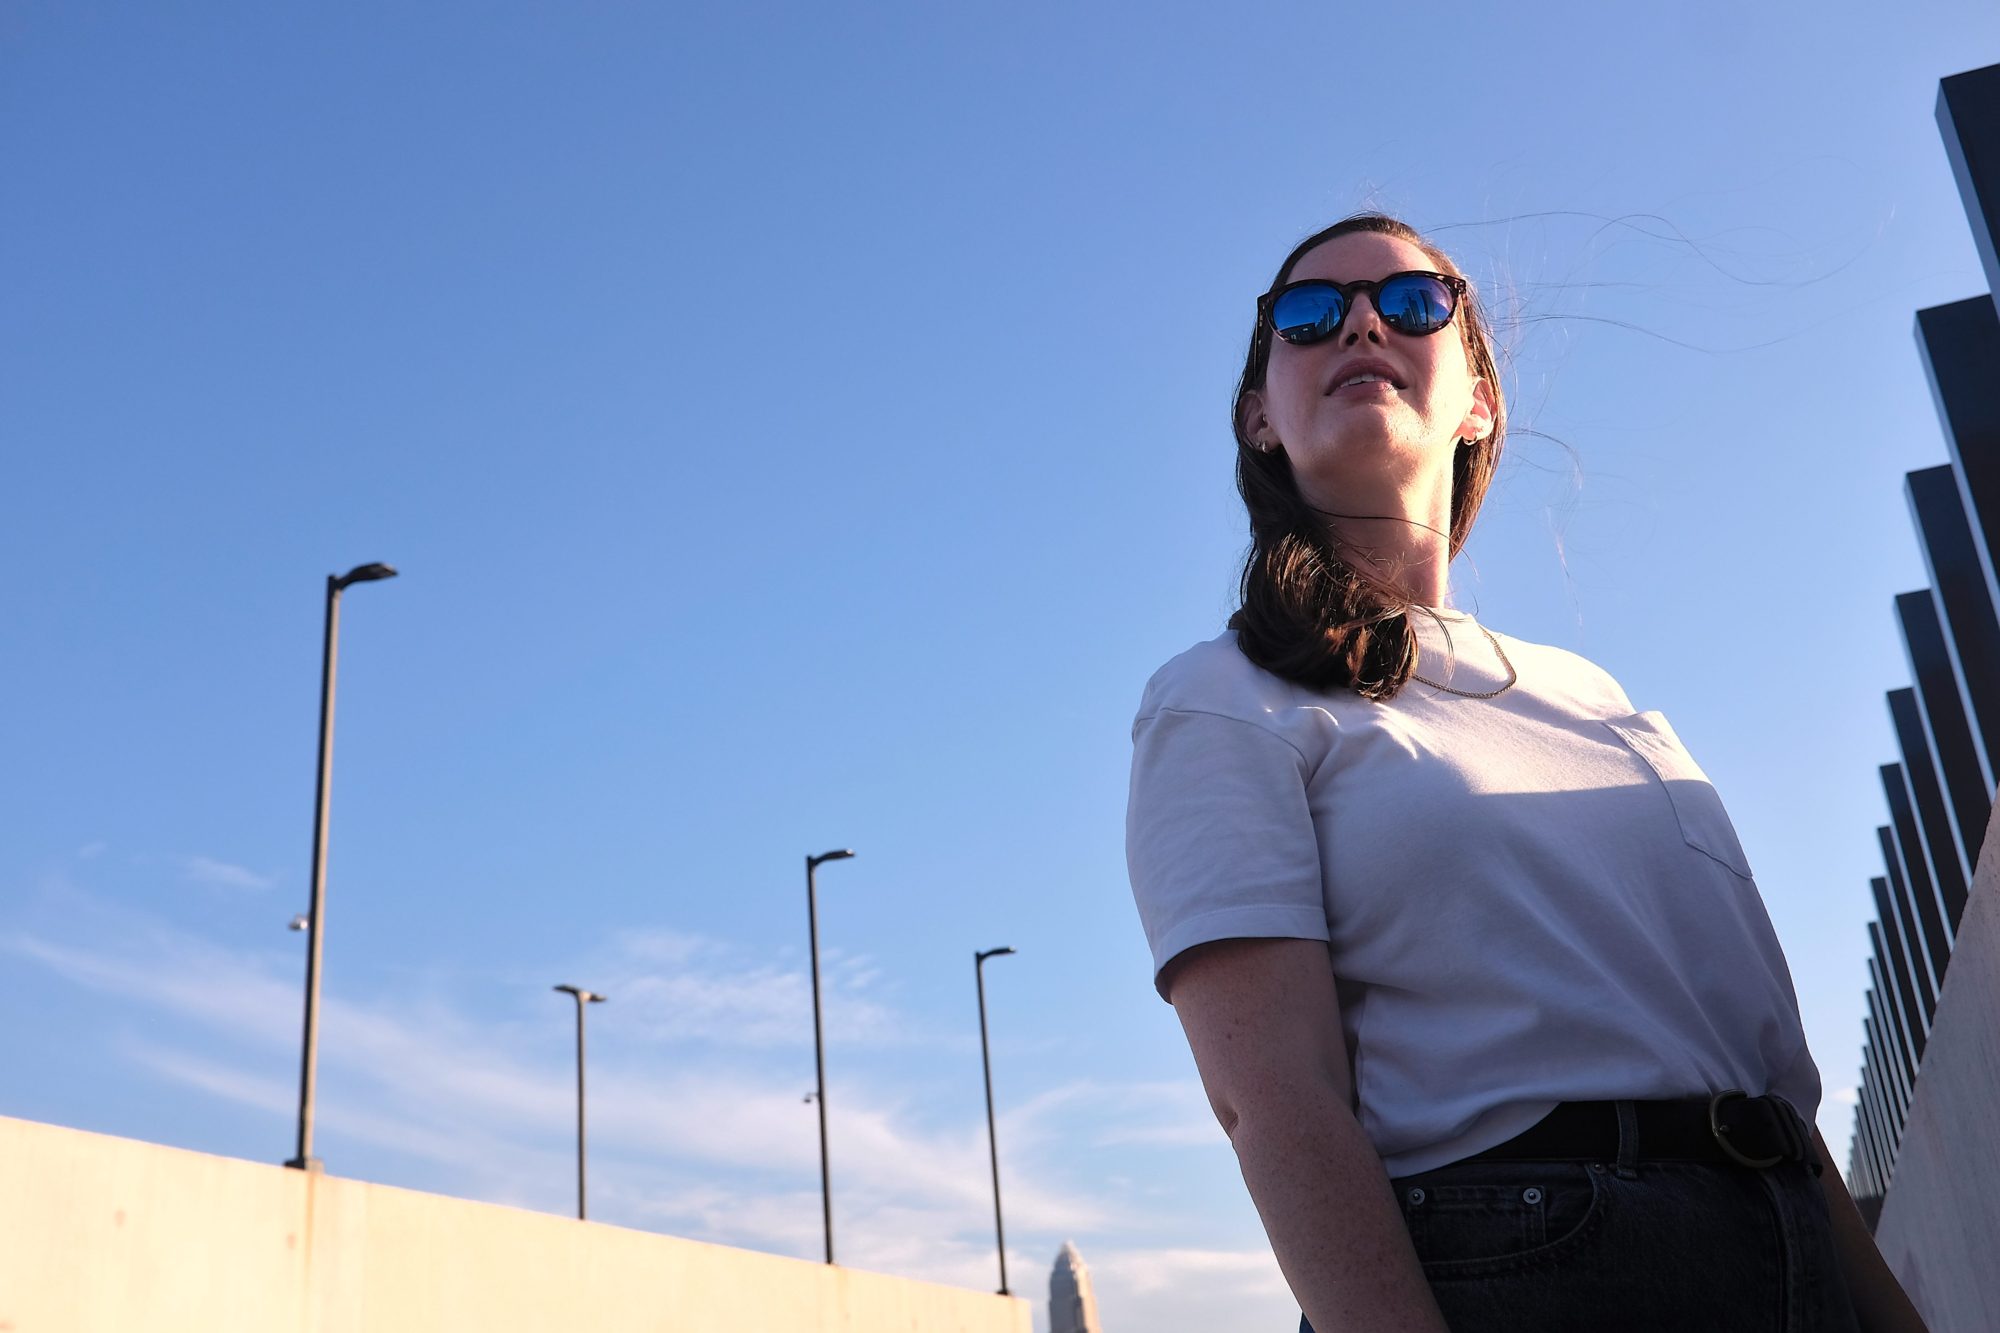 Alyssa wears the Sunski Dipsea sunglasses with a white tee and jeans on the roof of a parking deck